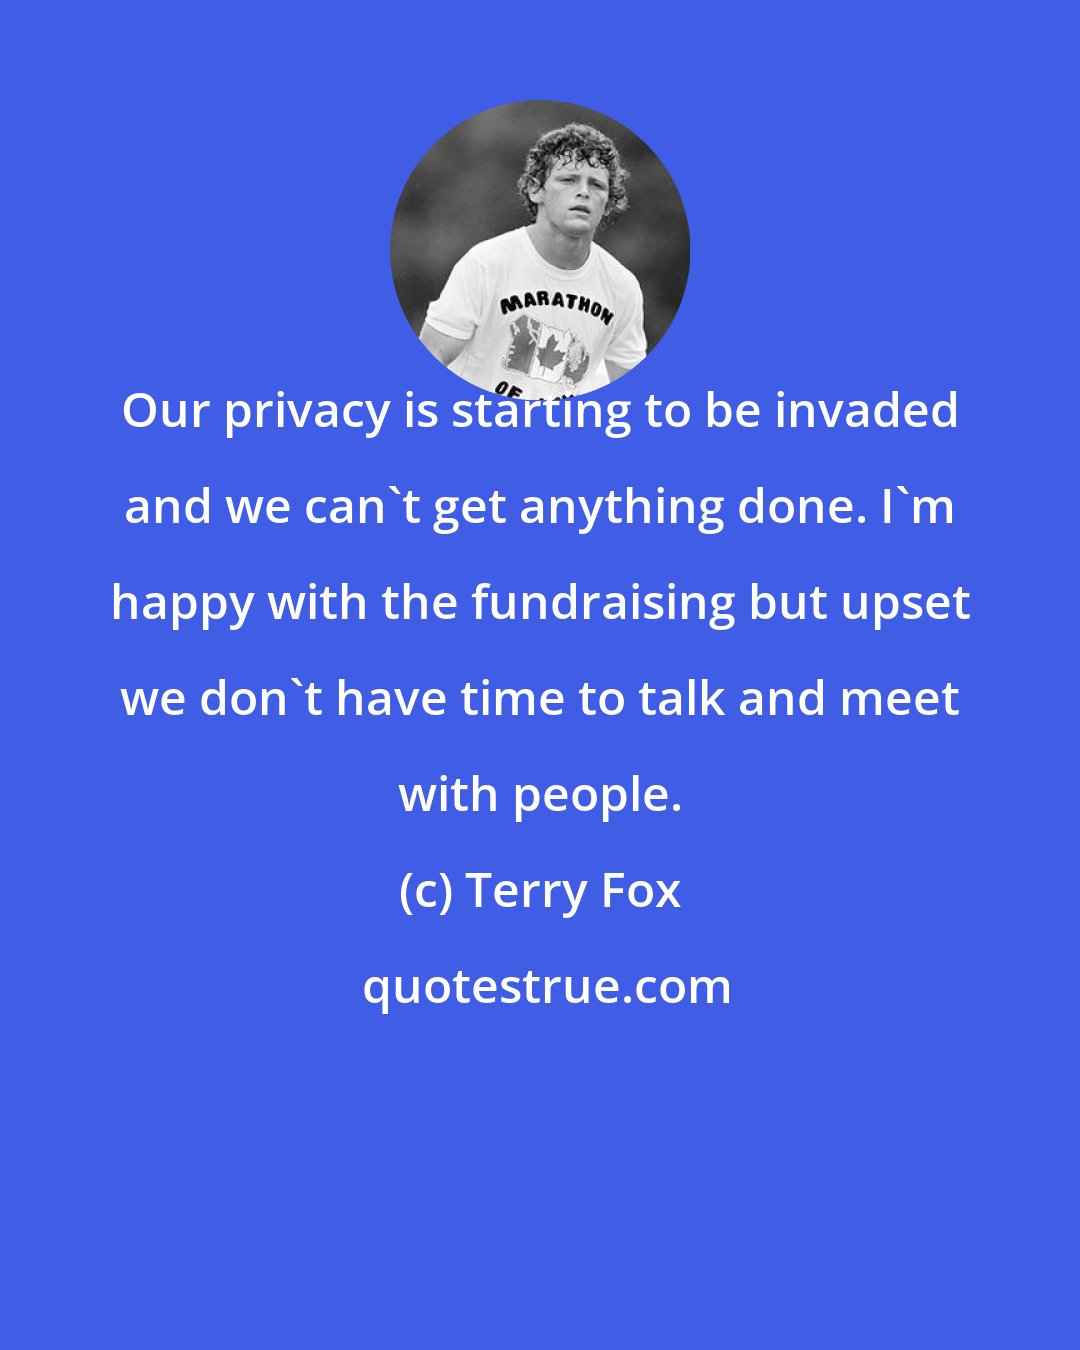 Terry Fox: Our privacy is starting to be invaded and we can't get anything done. I'm happy with the fundraising but upset we don't have time to talk and meet with people.